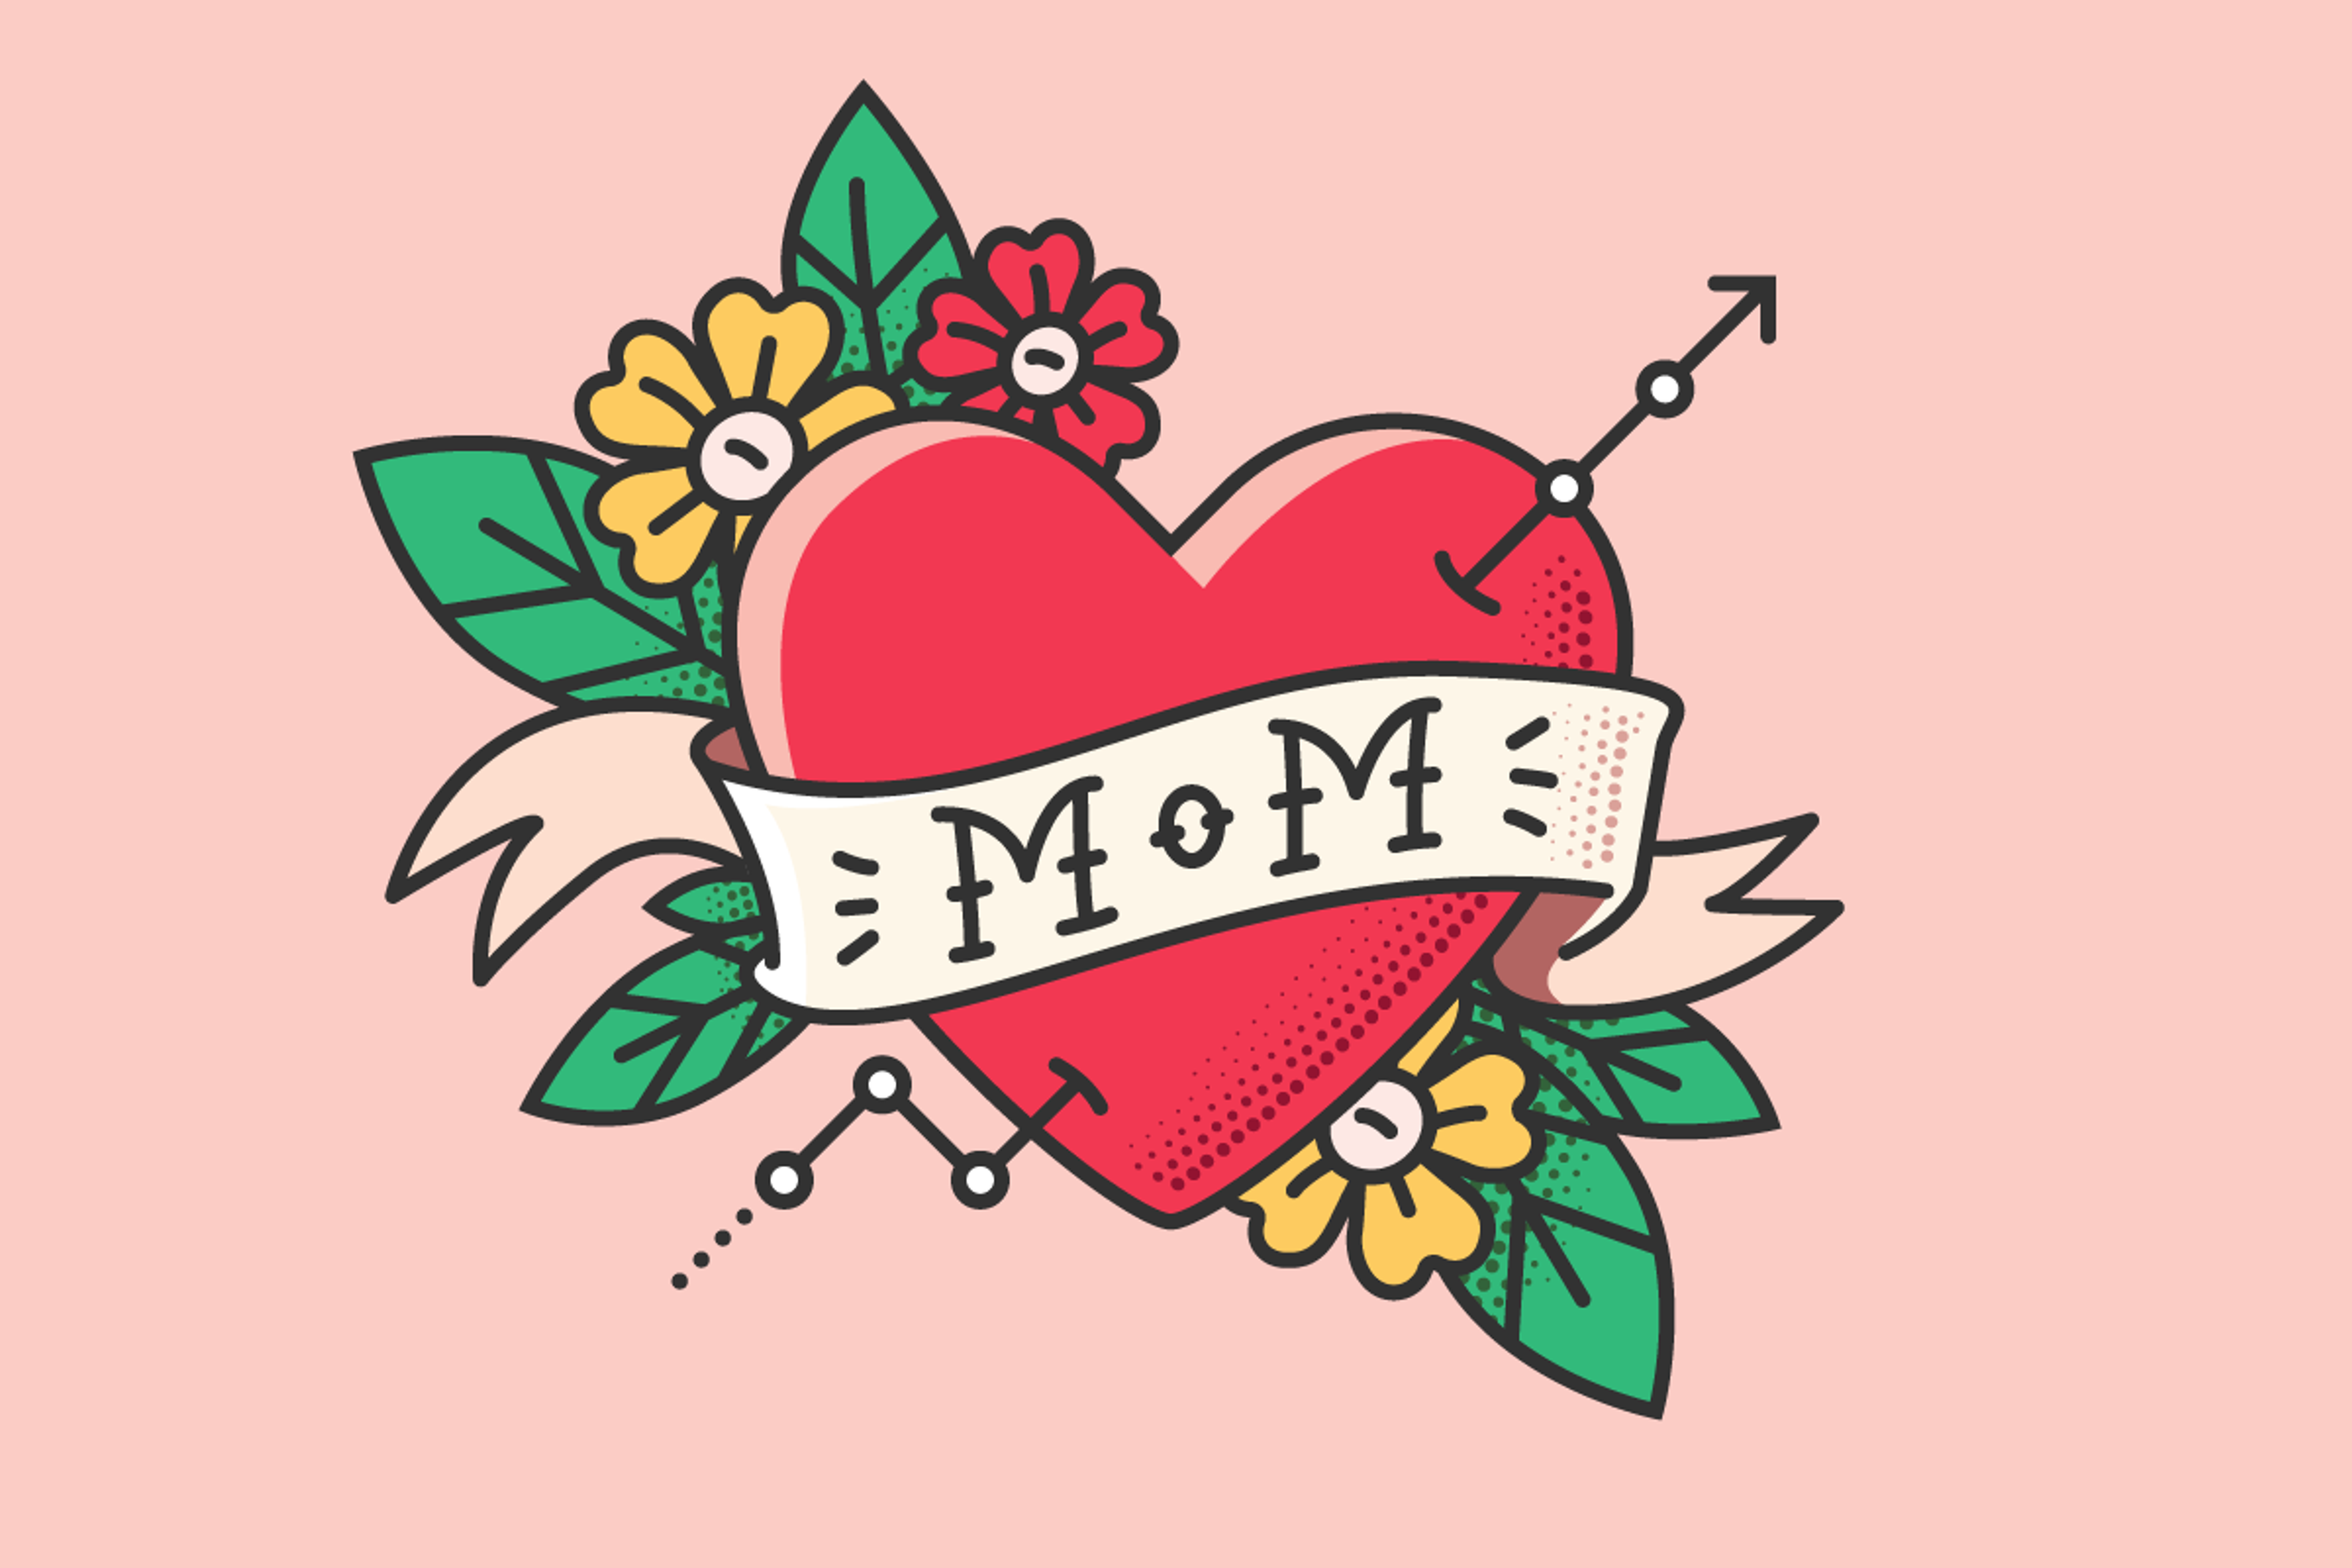 Picture of a tattoo showing the word "mom" inside of a heart, along with an uptrending line chart